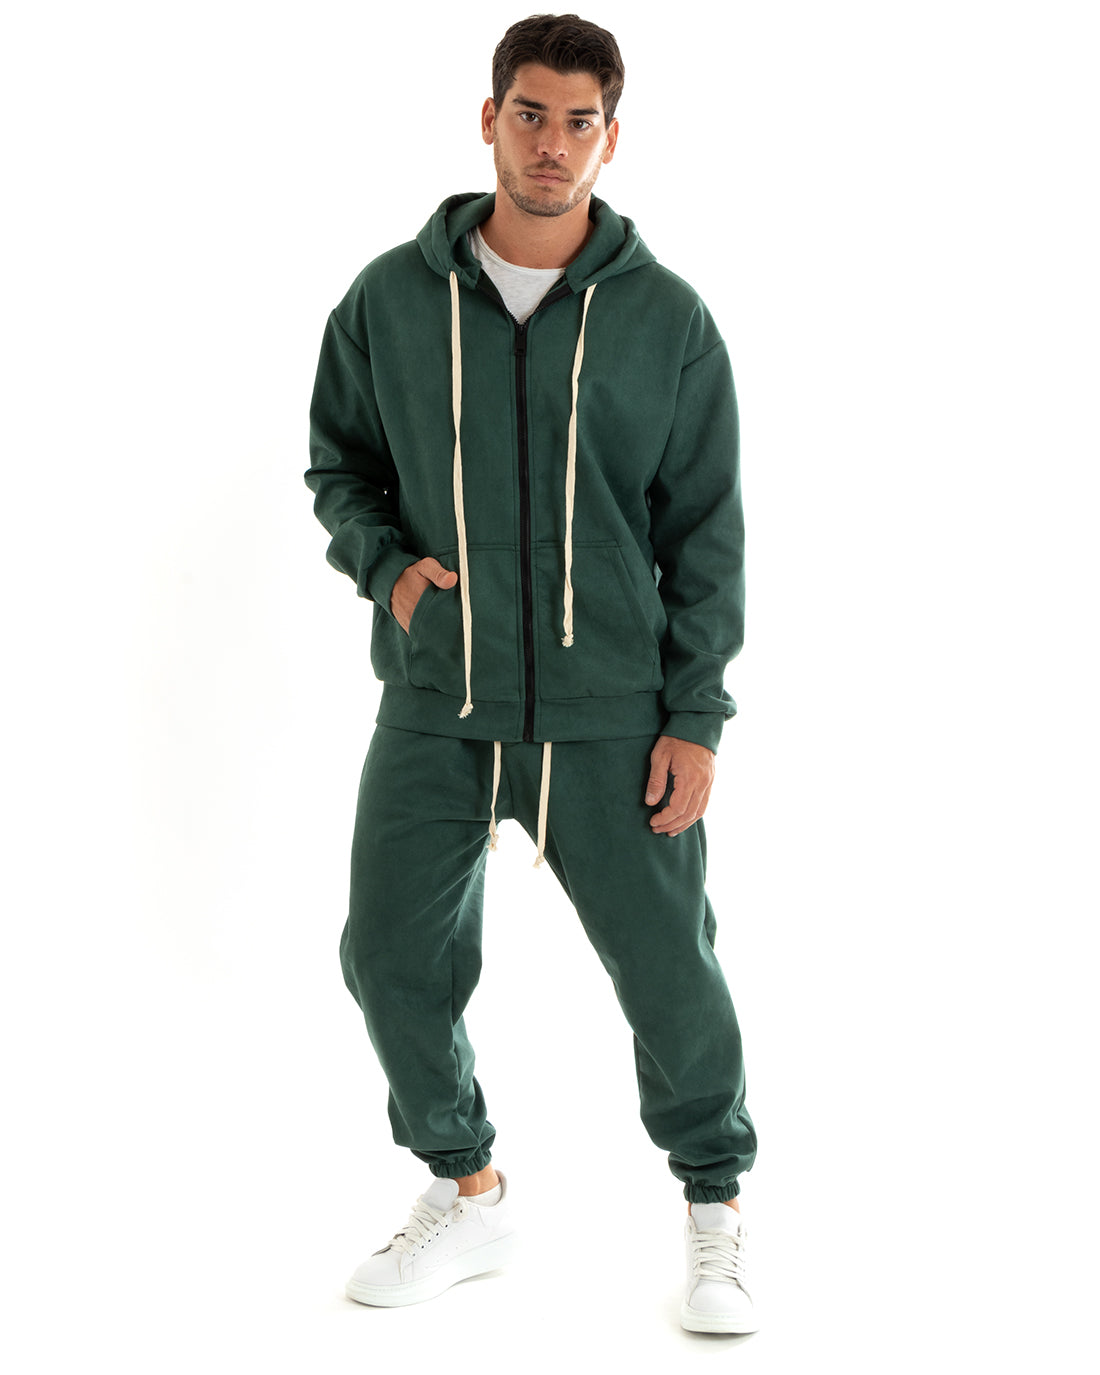 Men's Tracksuit Set with Hood and Zip Trousers with Drawstring Waist in Green Eco Suede GIOSAL-OU2397A